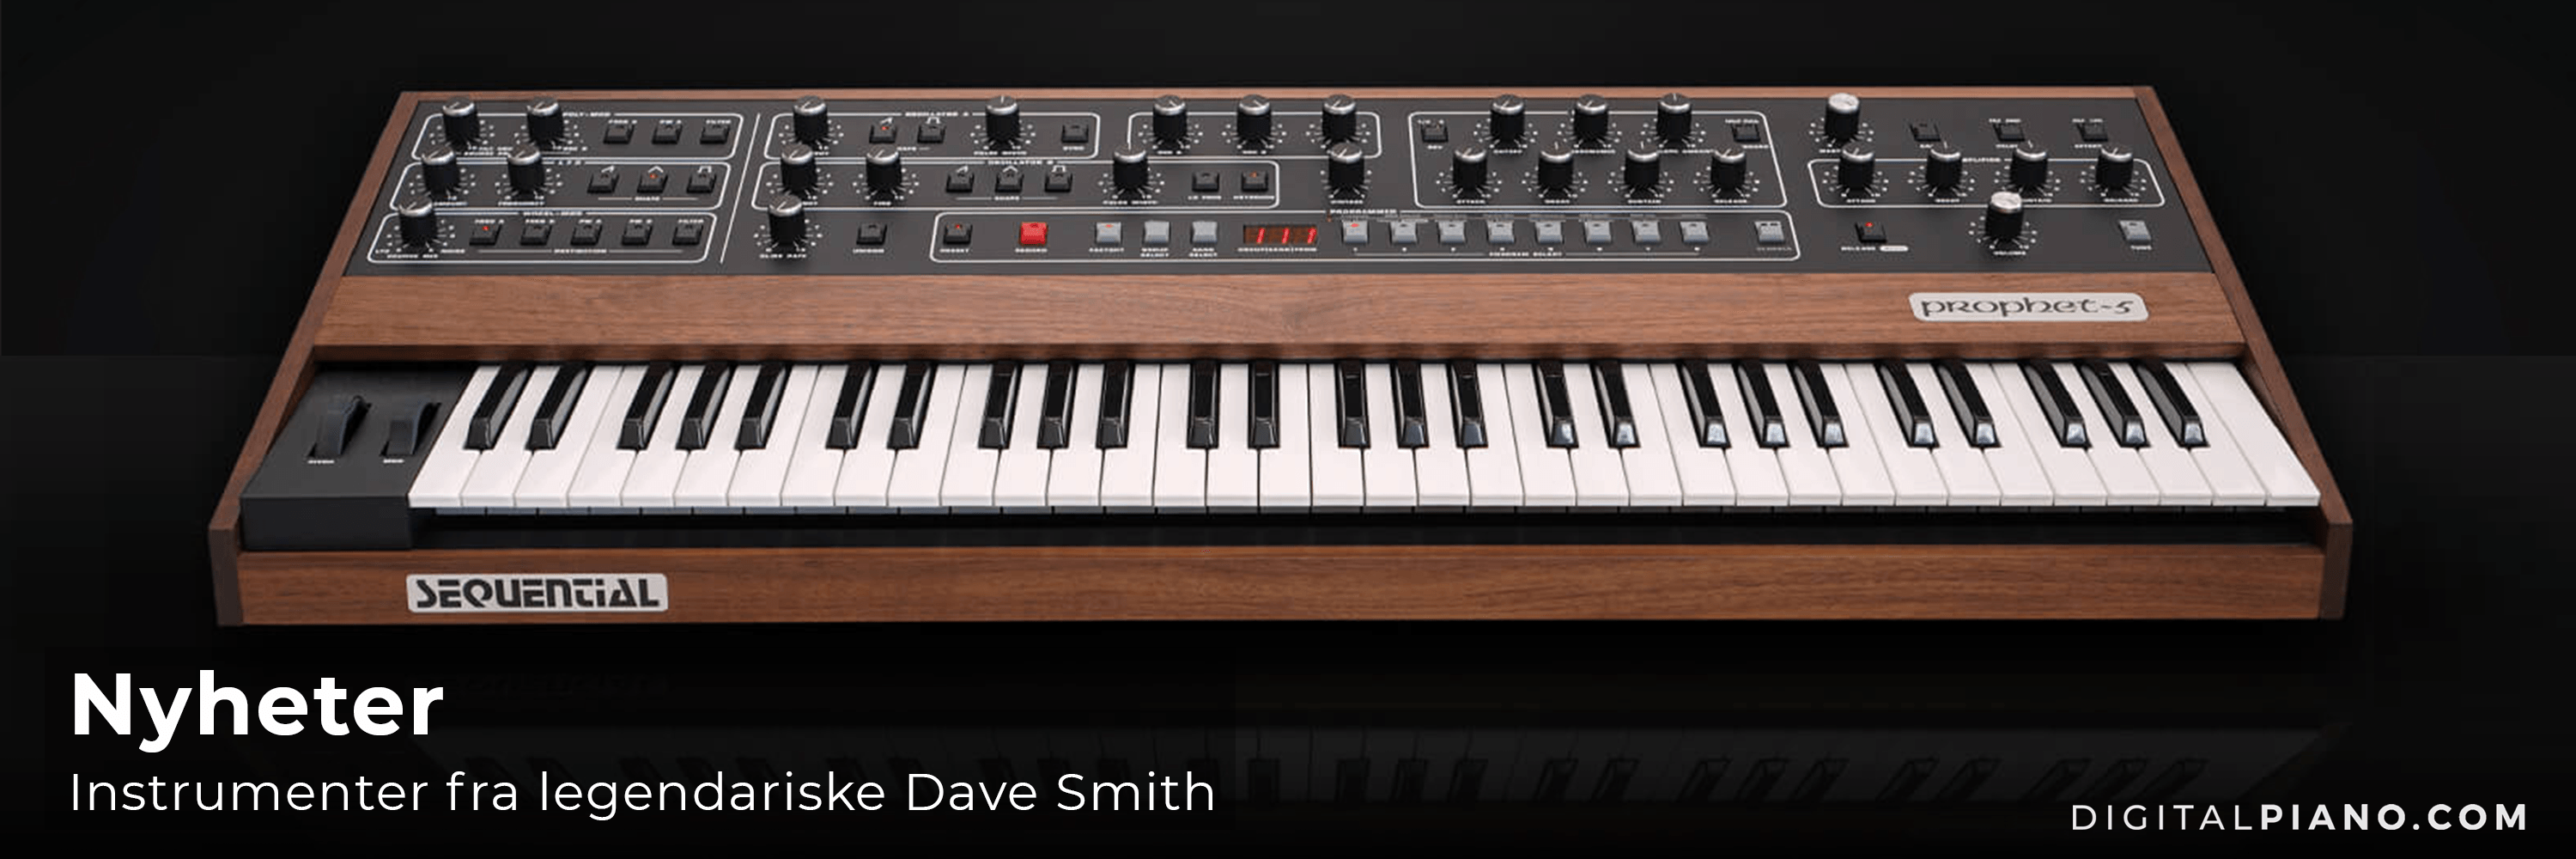 Velkommen til Dave Smiths Sequential Synthesizers